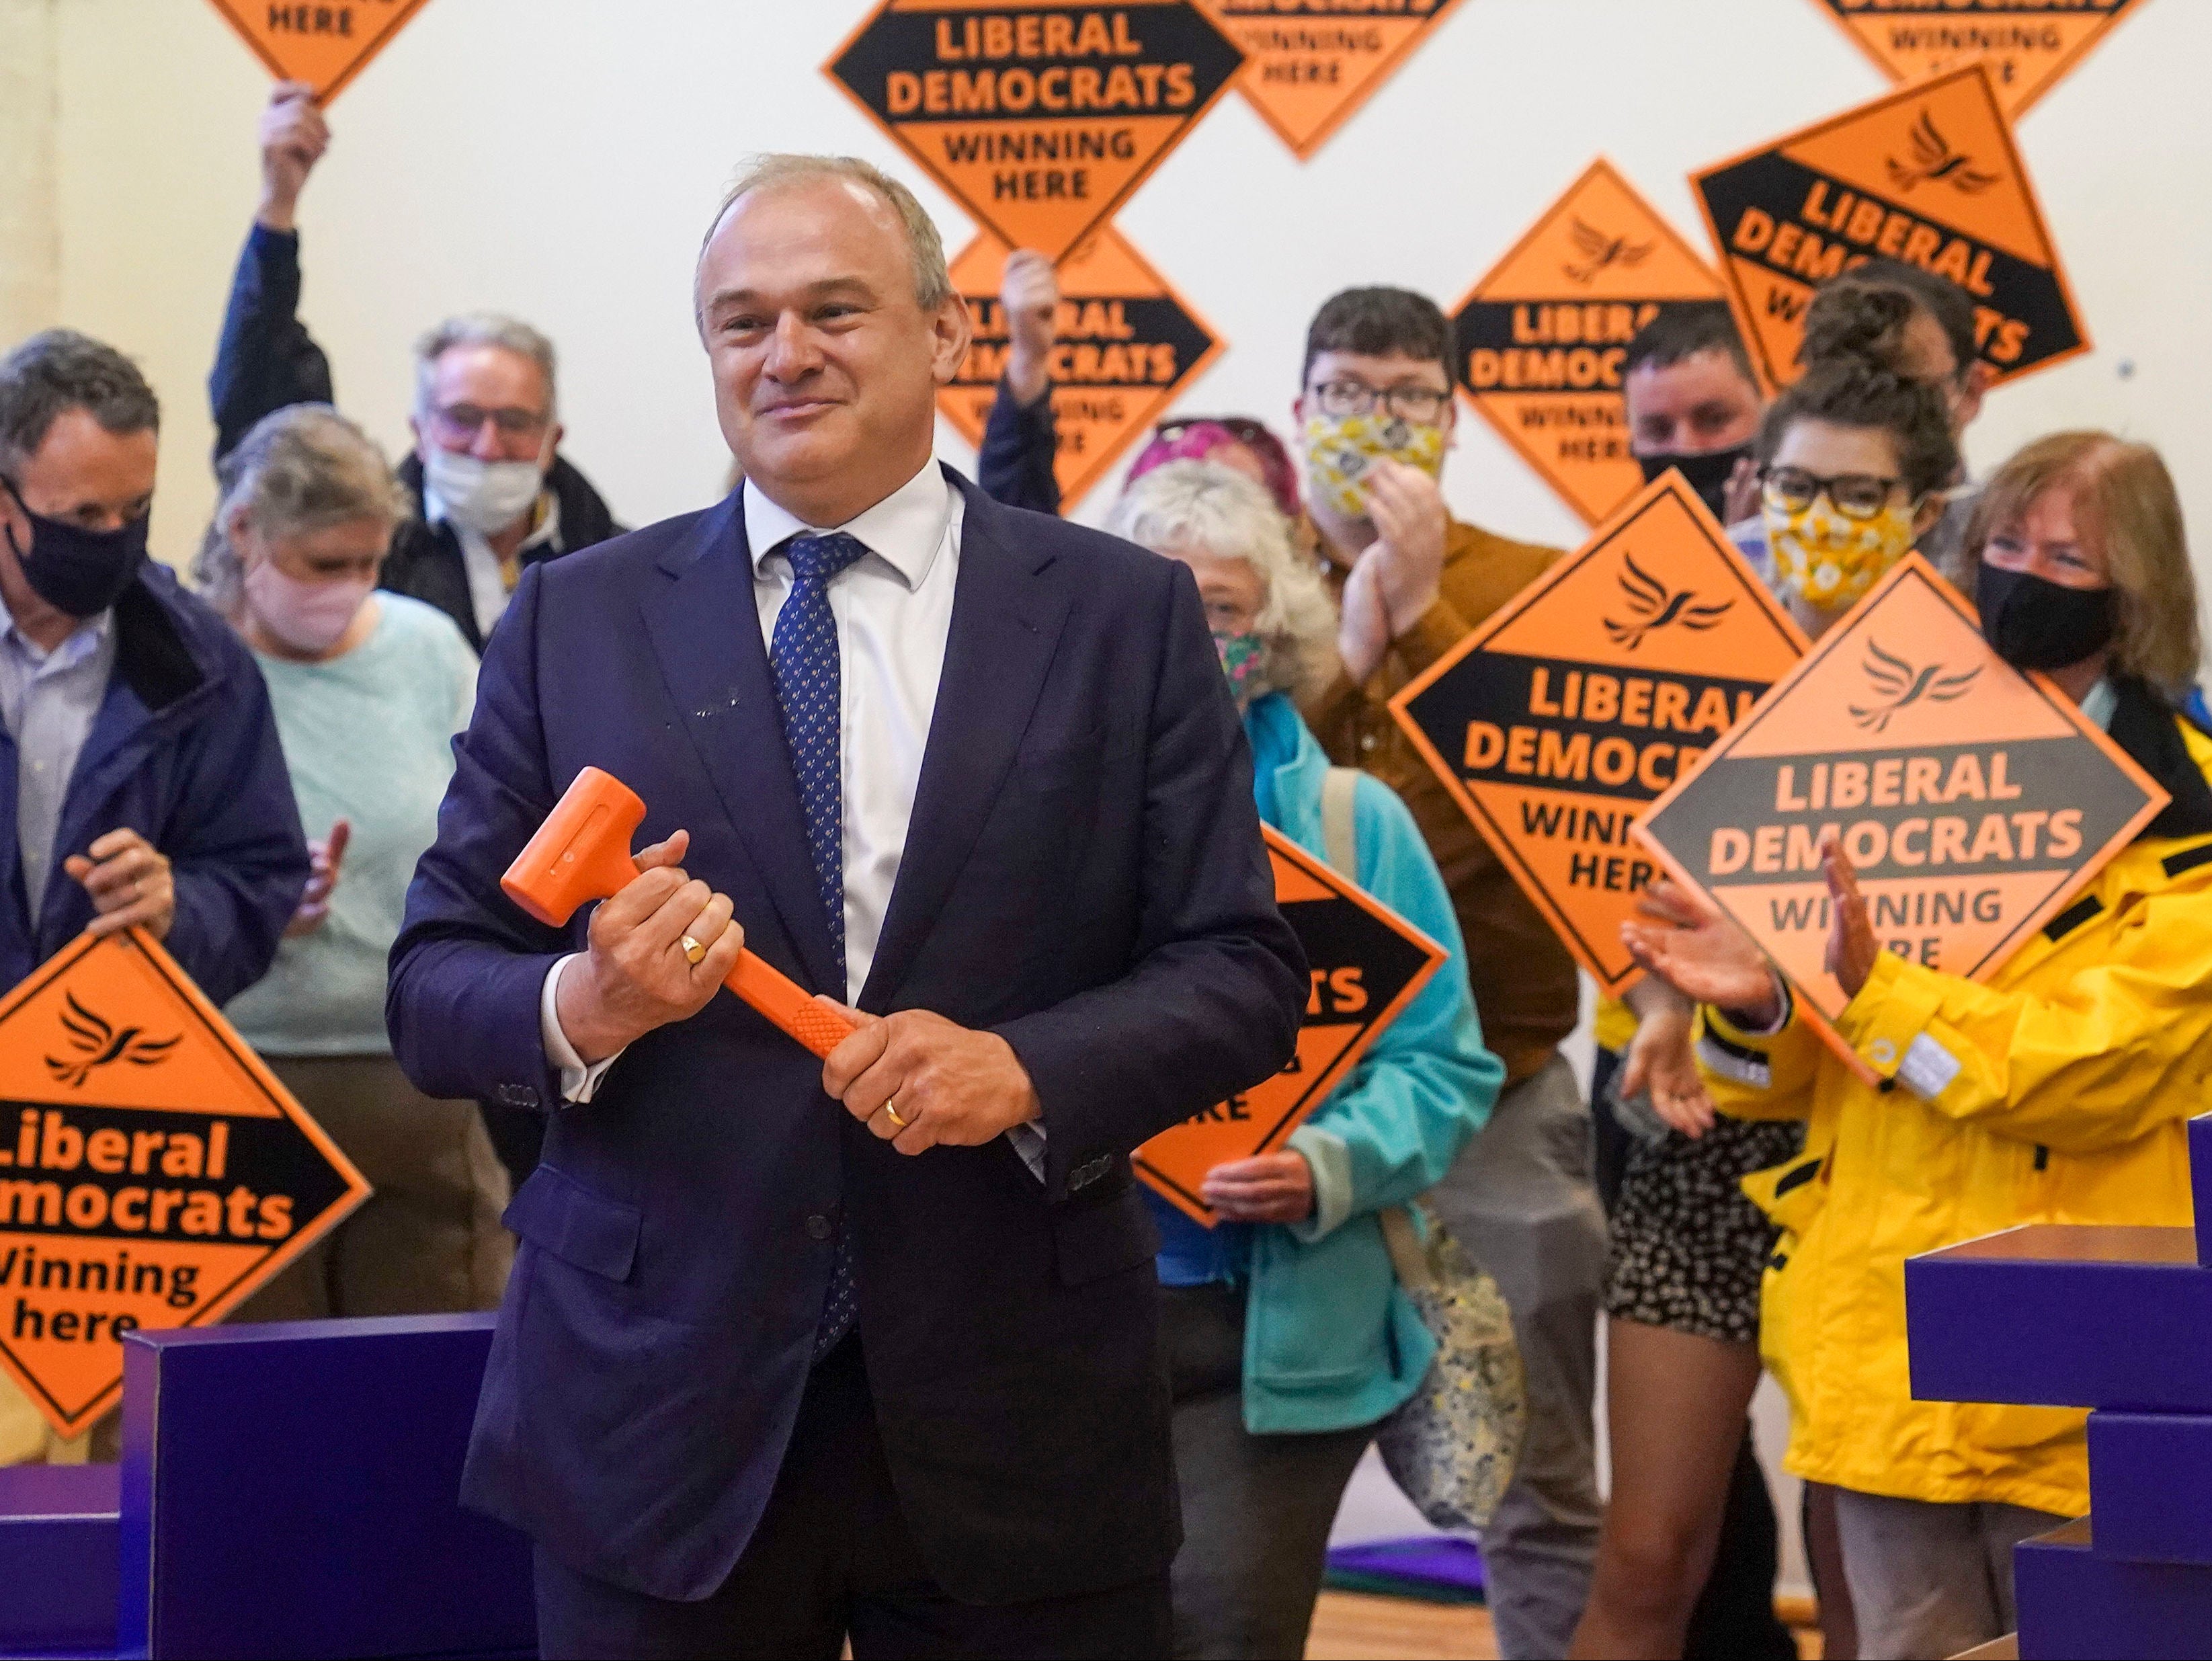 Liberal Democrat leader Ed Davey during a victory rally in the wake of the Chesham and Amersham by-election